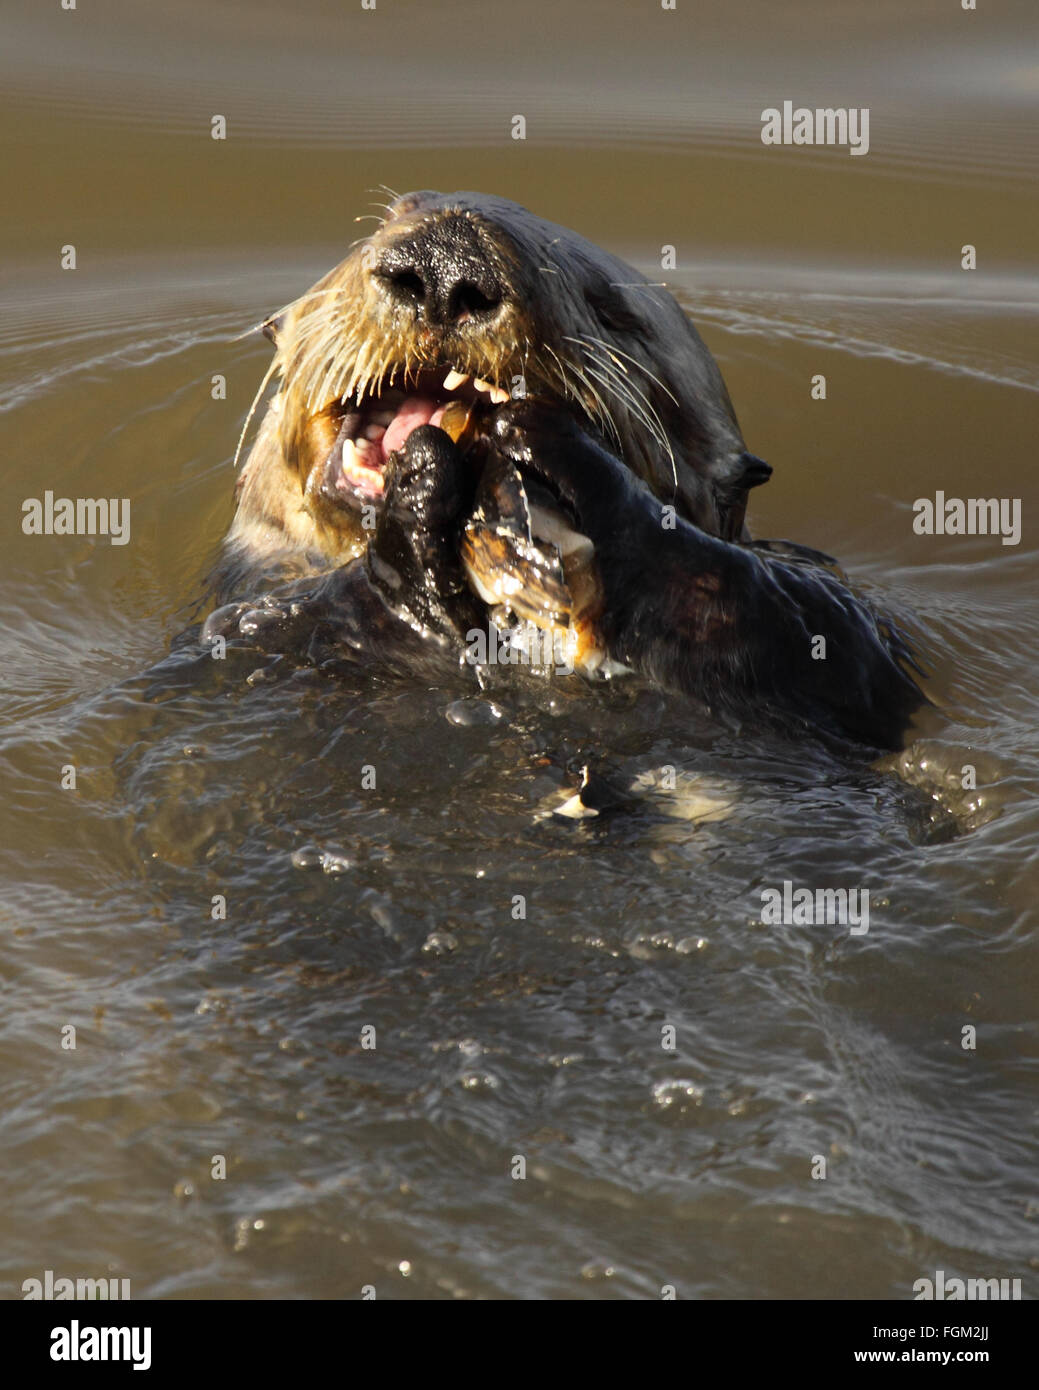 A Sea Otter chewing on a clam. Stock Photo